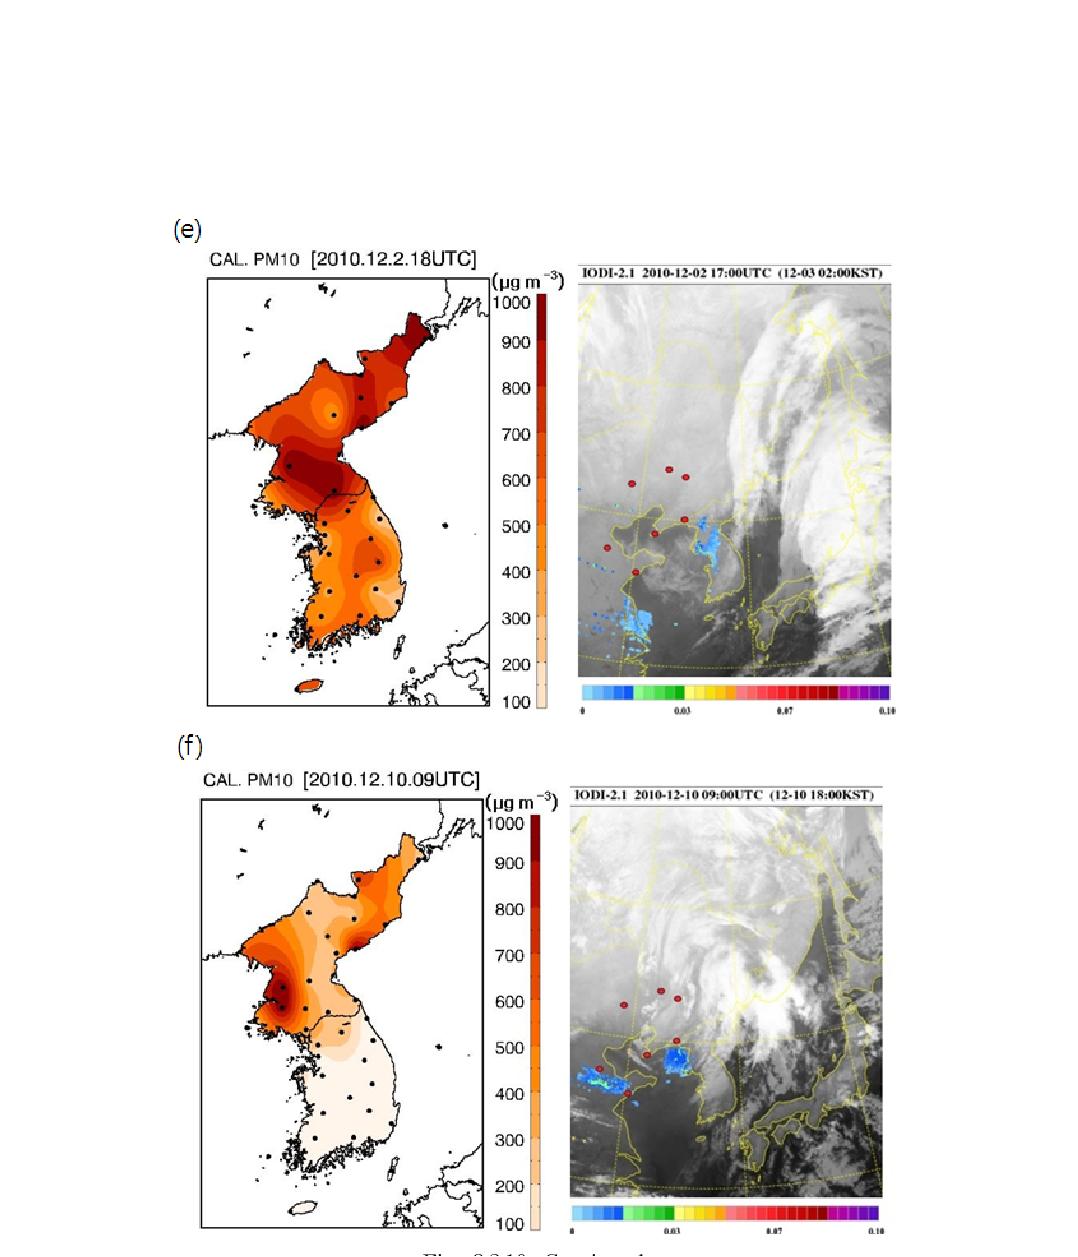 Spatial distributions of calculated PM10 concentration using visibility data (left) and IODI images of MTSAT (left) at (a) 21 UTC 24 January (b) 15 UTC 12 March, (c) 18 UTC 15 March, (d) 00 UTC 2 April, (e) 18 UTC 2 December, and (f) 09 UTC 10 December in 2010.